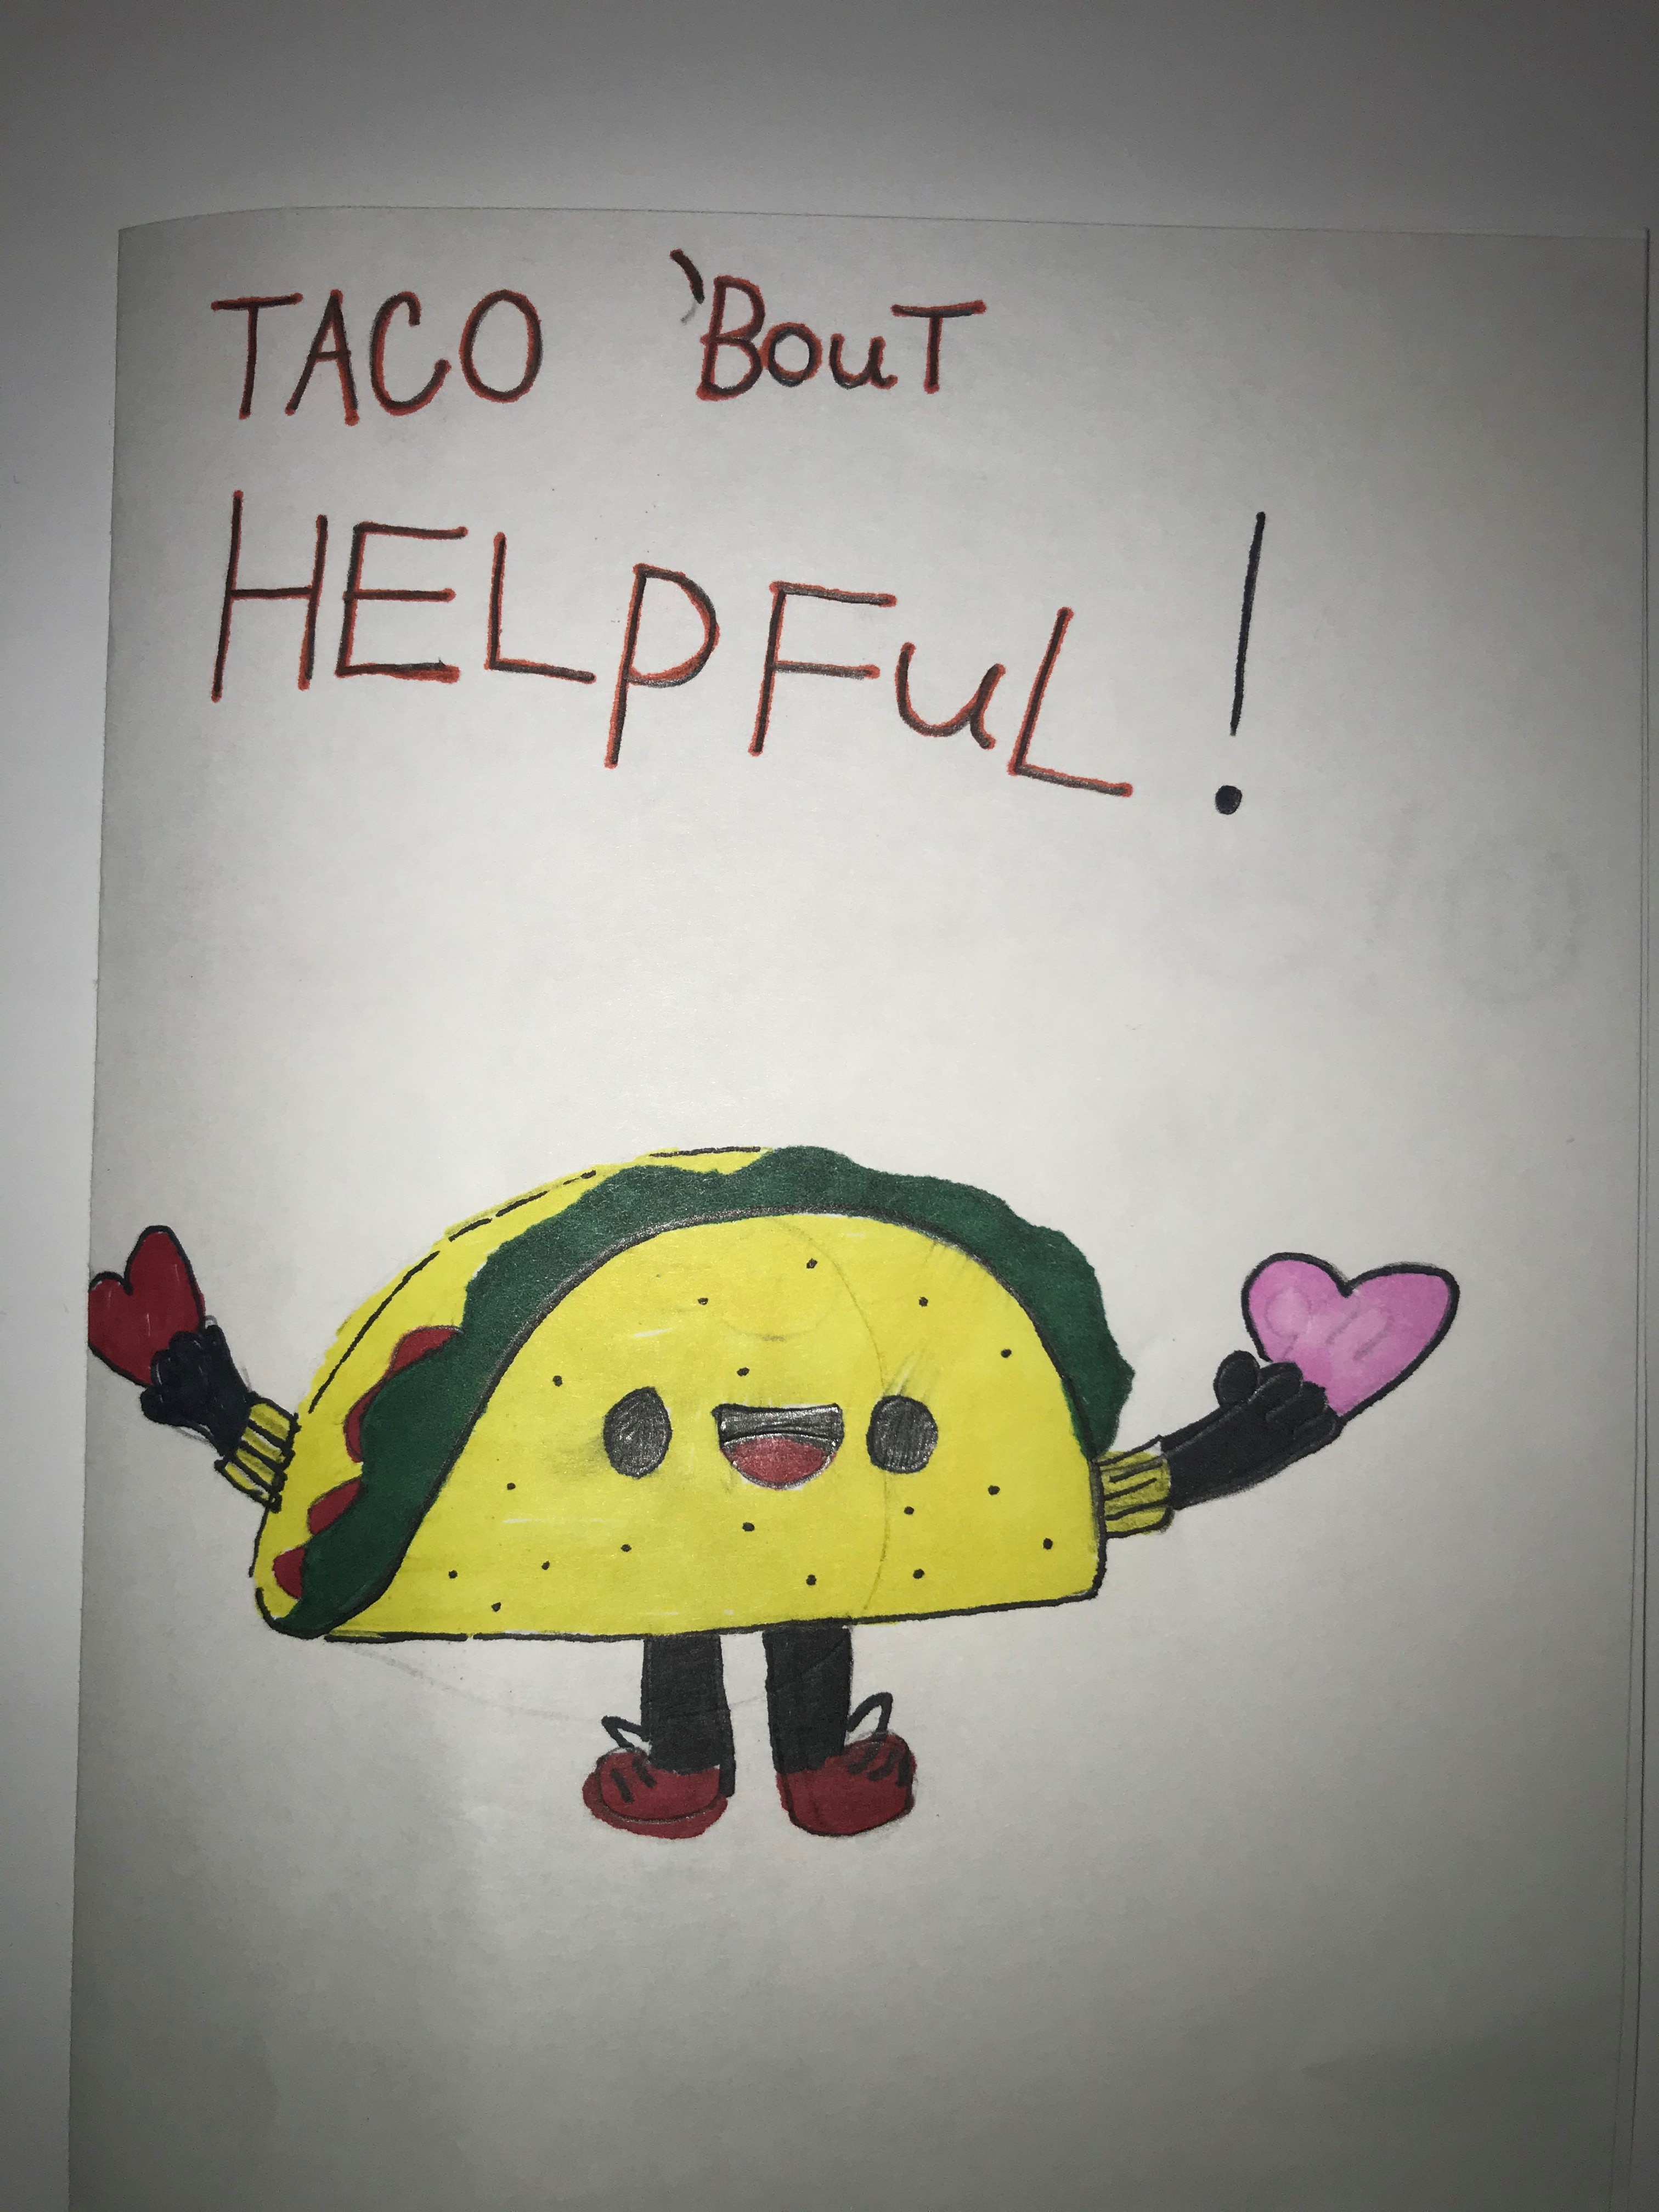 Taco 'bout helpful!